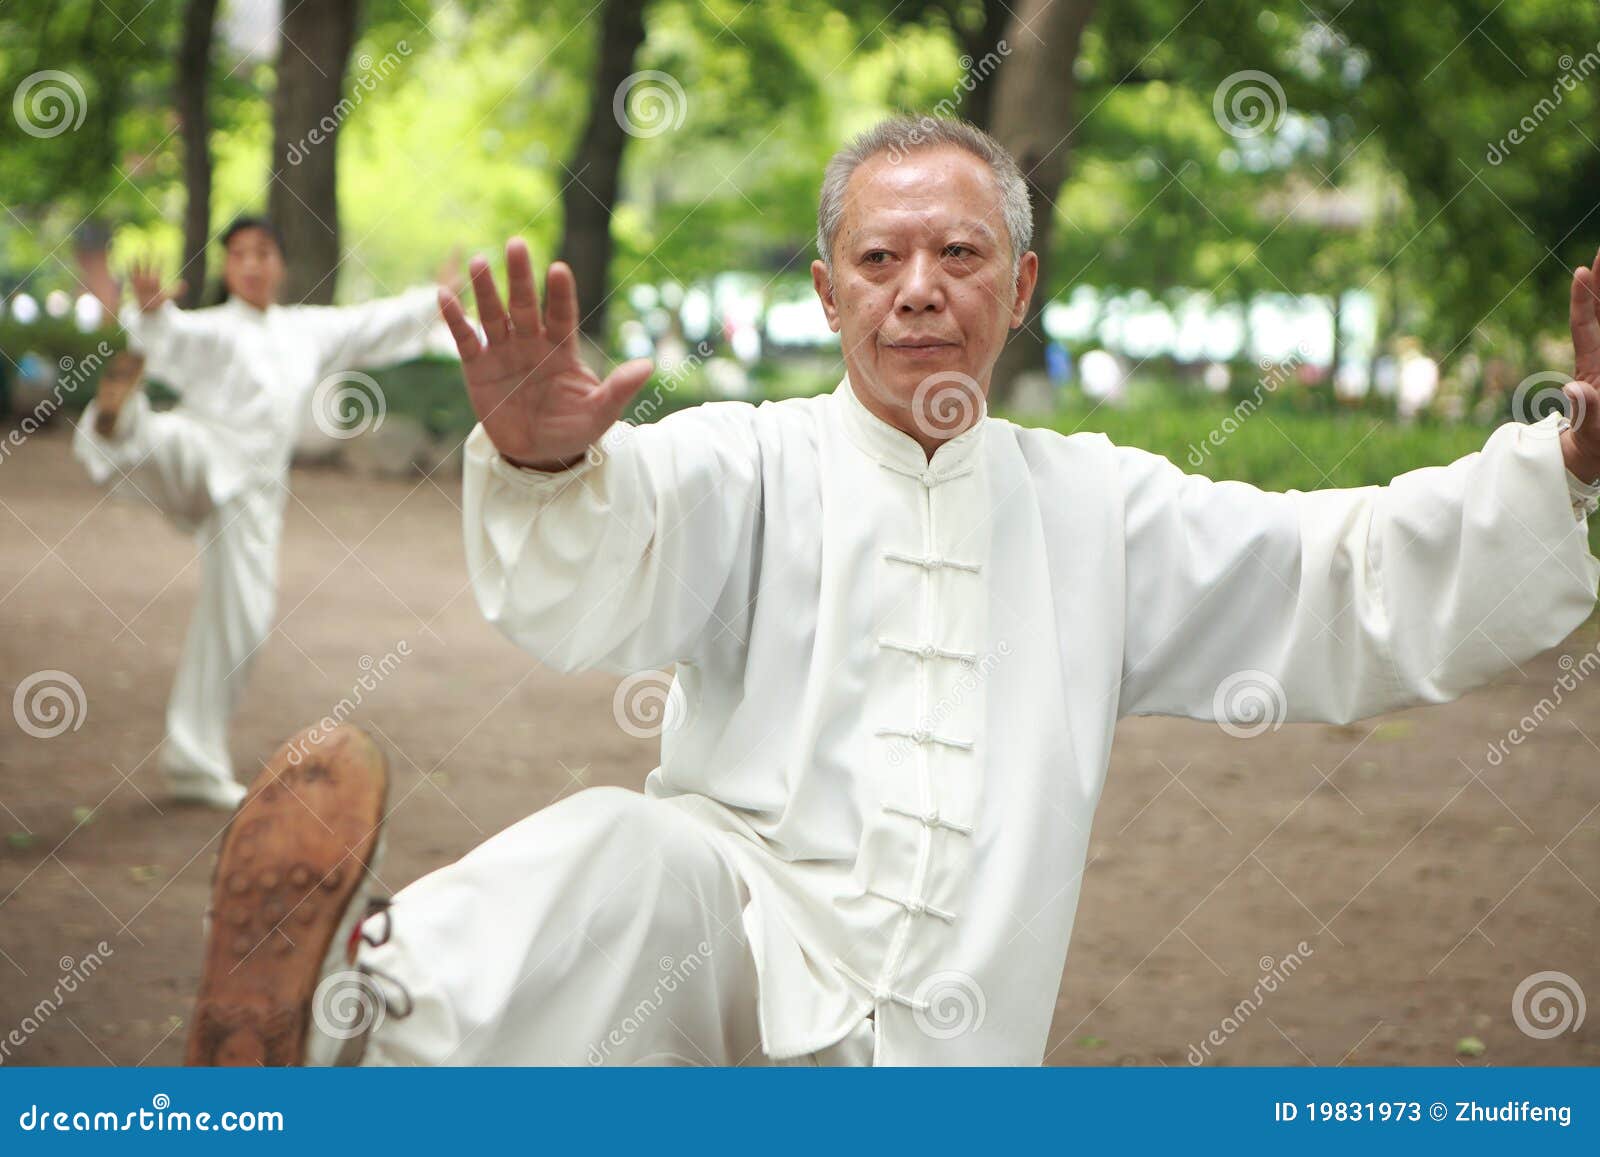 19,351 Old Chinese Man Stock Photos - Free & Royalty-Free Stock